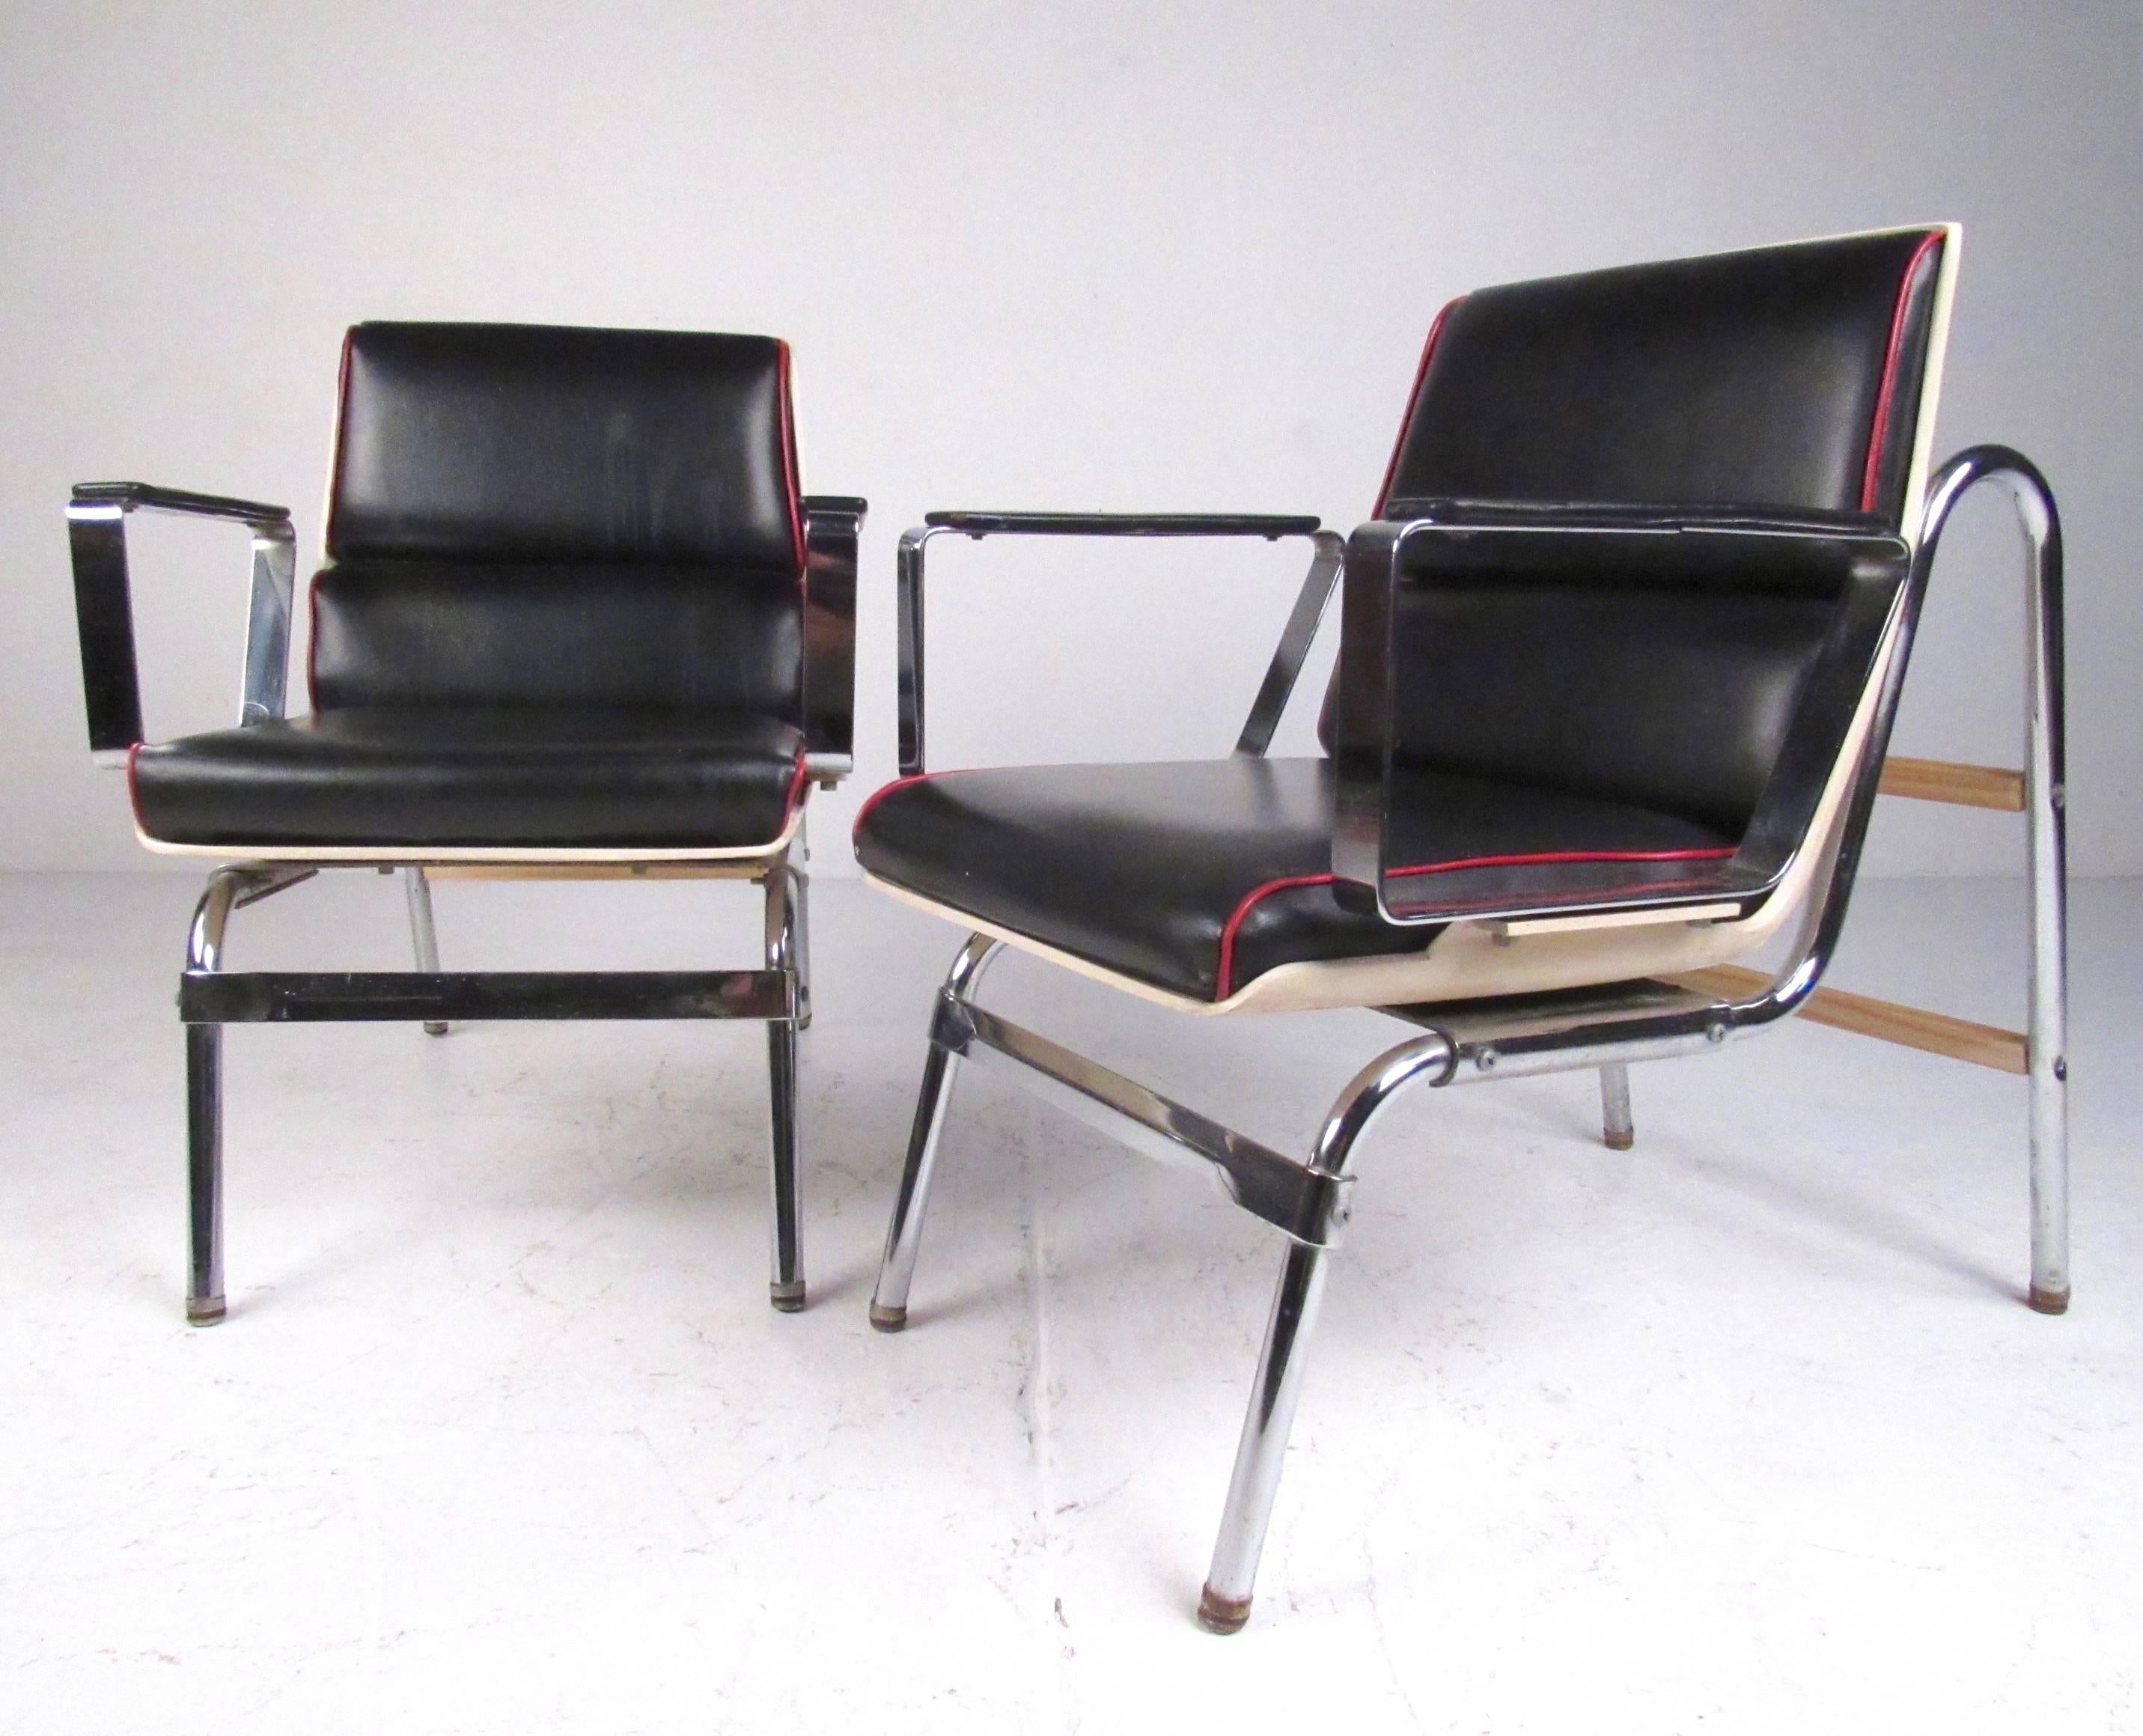 This unique pair of retro modern arm chairs features striking Mid-Century design without sacrificing comfort. Stylish vintage design by Belmont makes these eye-catching black vinyl and chrome lounge chairs the perfect addition to home or office.